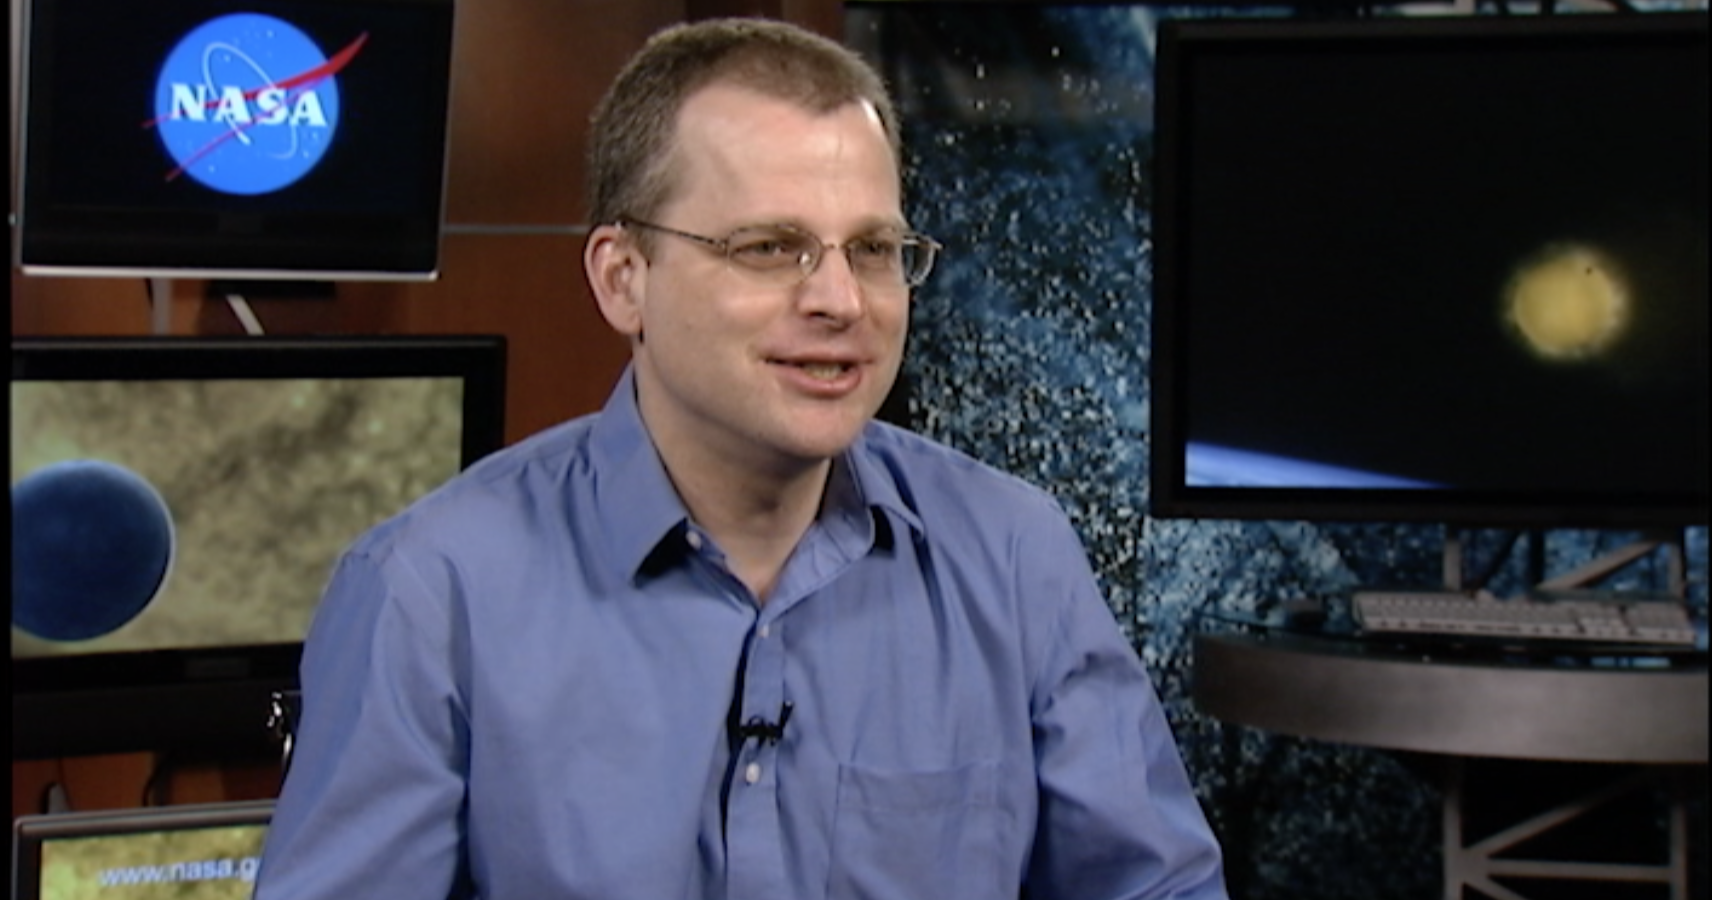 NASA scientist Dr. Stephen Rinehart talks about the May 9 Mercury transit, why transits are important and how scientists are using transits in the search for exoplanets. 